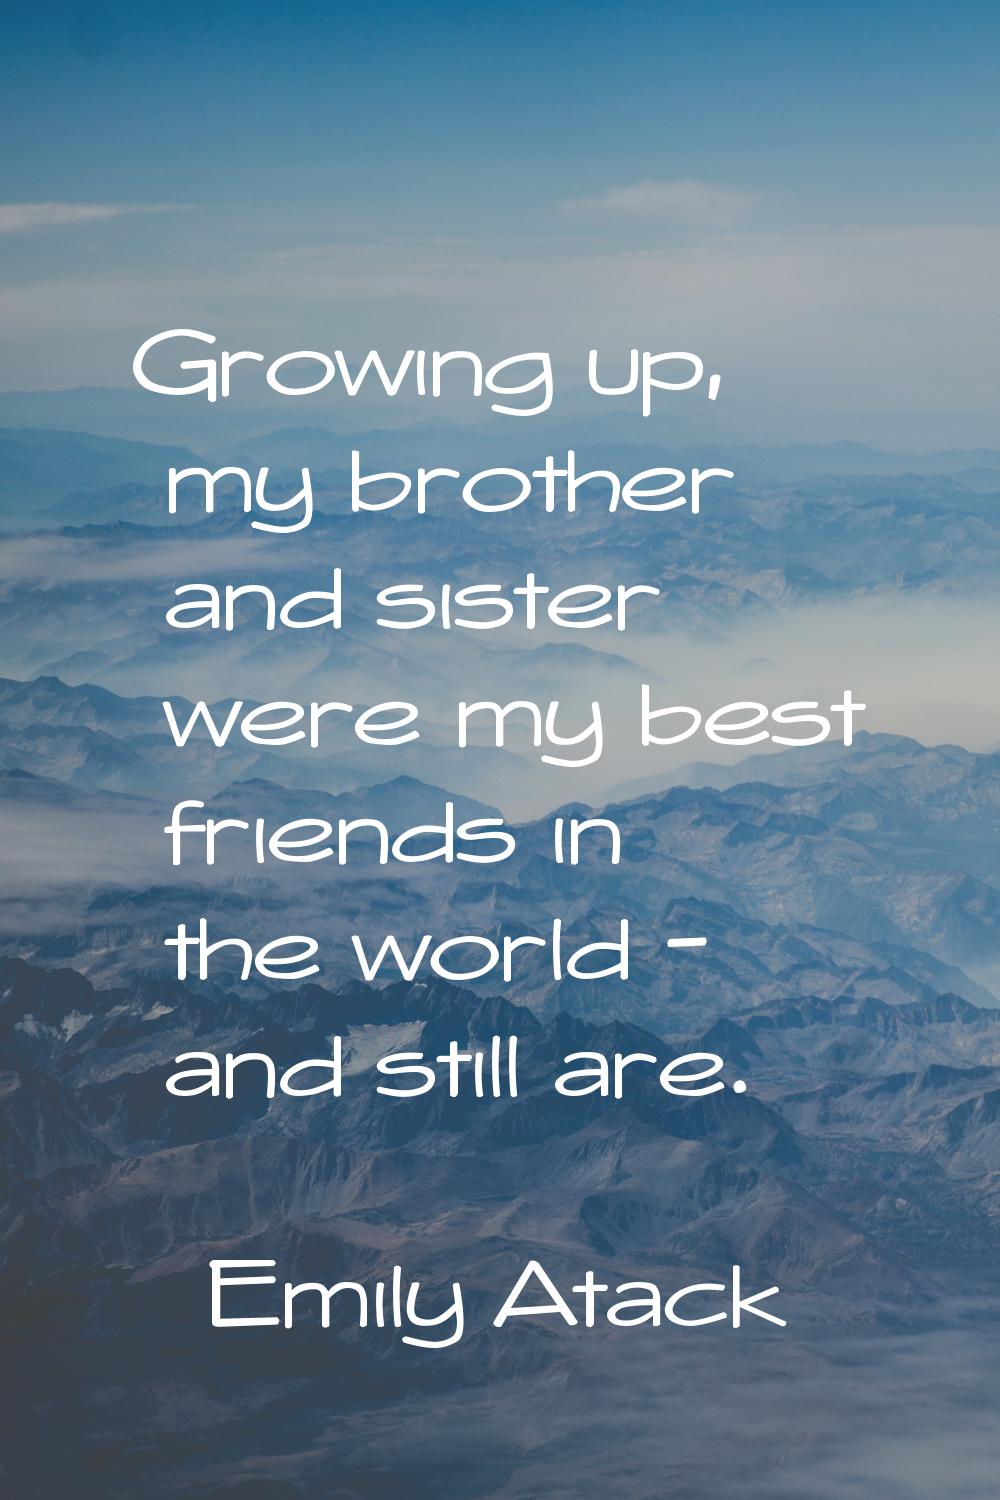 Growing up, my brother and sister were my best friends in the world - and still are.